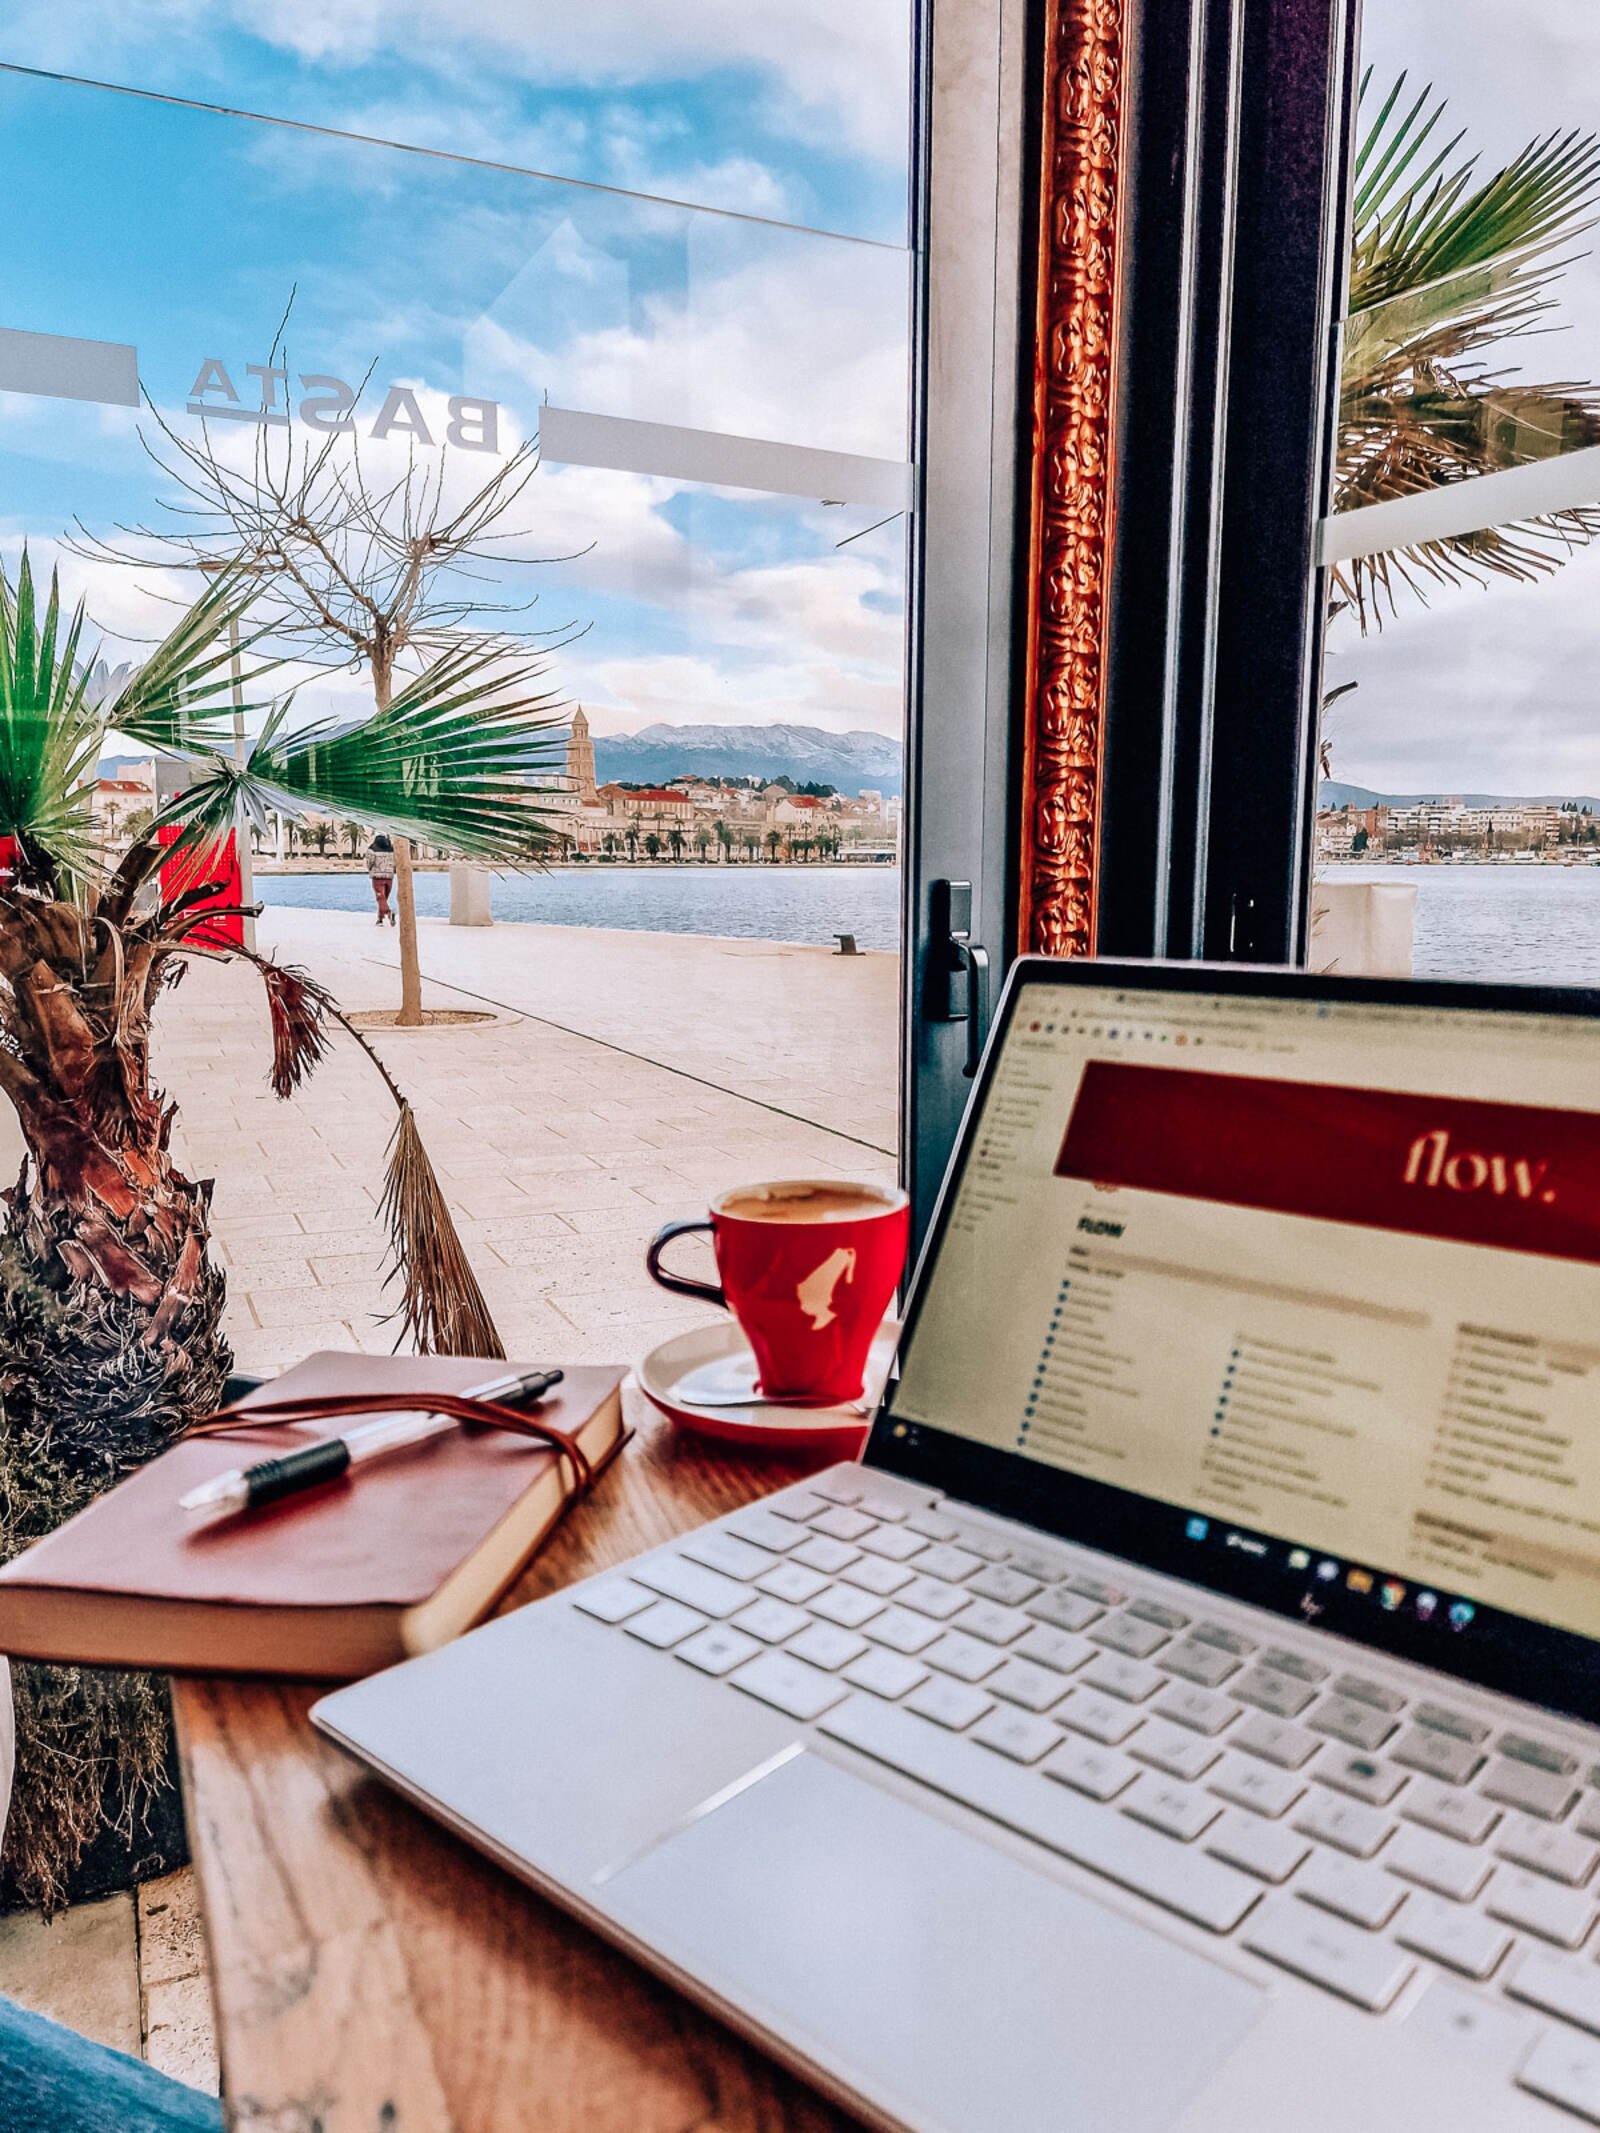 A laptop open on a cafe table with a red coffee cup and leather notebook next to it, the view out the window behind is of a coastal city harbour, Split Croatia